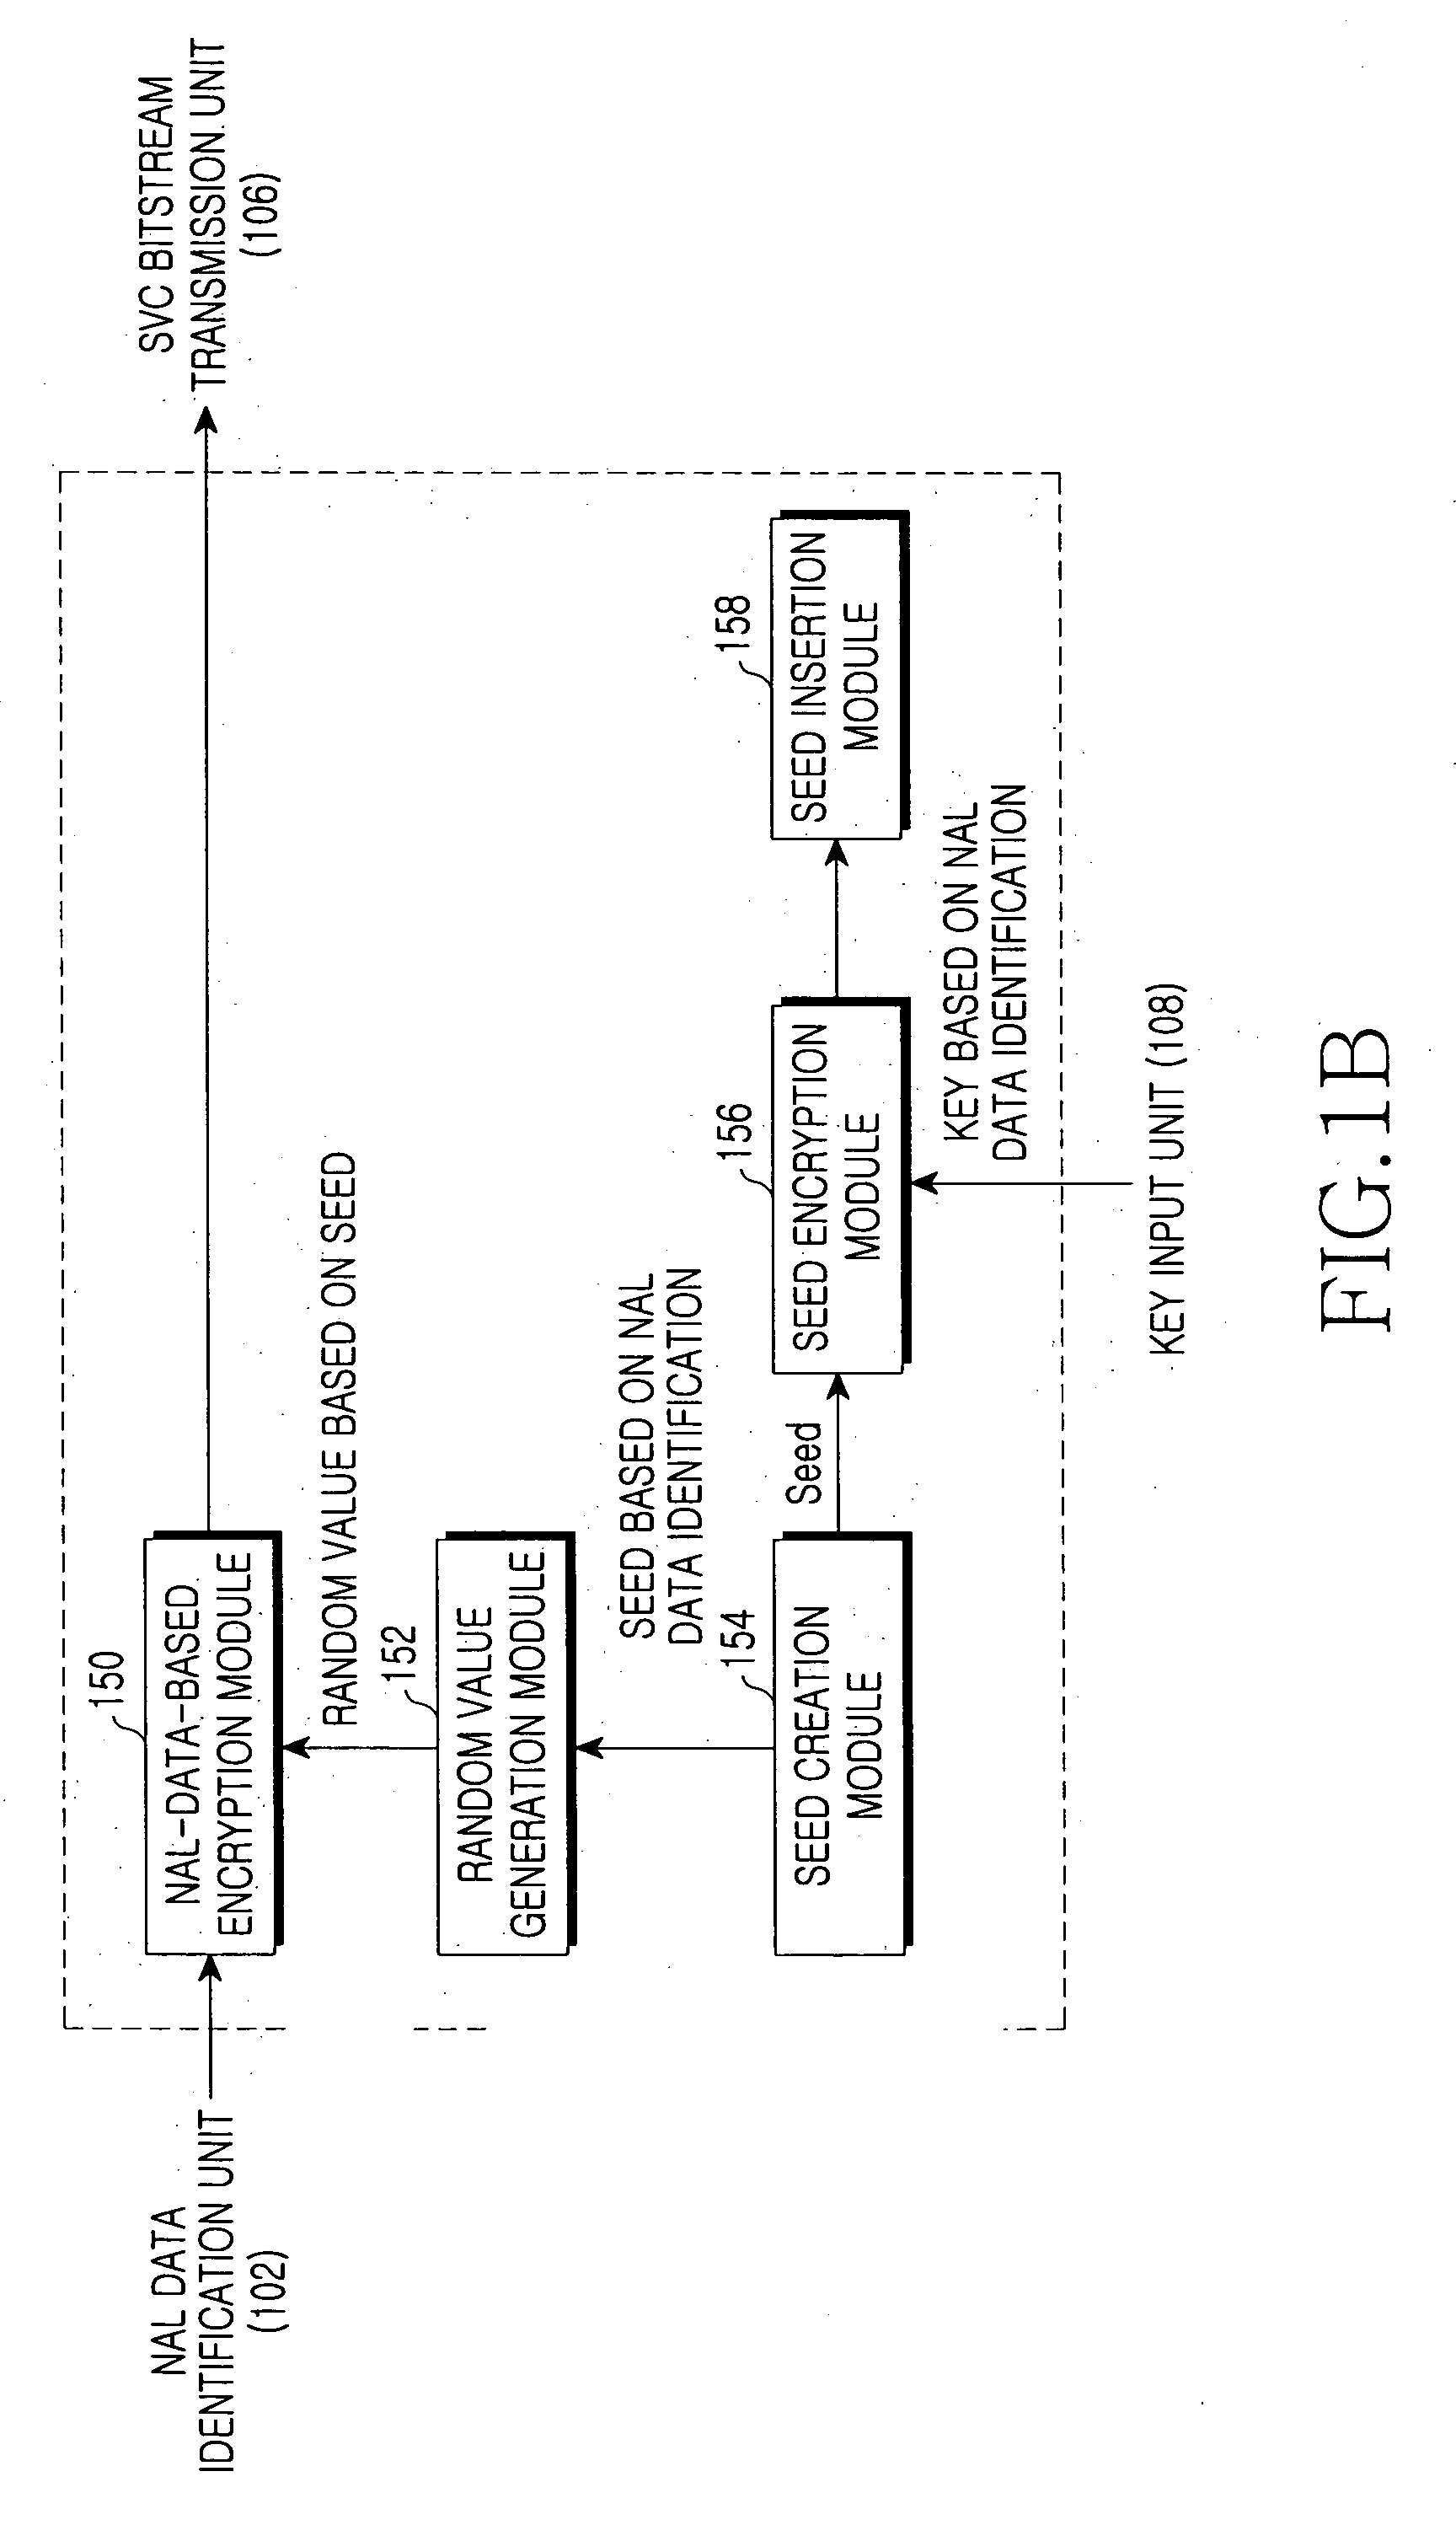 Method and system for encryption/decryption of scalable video bitstream for conditional access control based on multidimensional scalability in scalable video coding